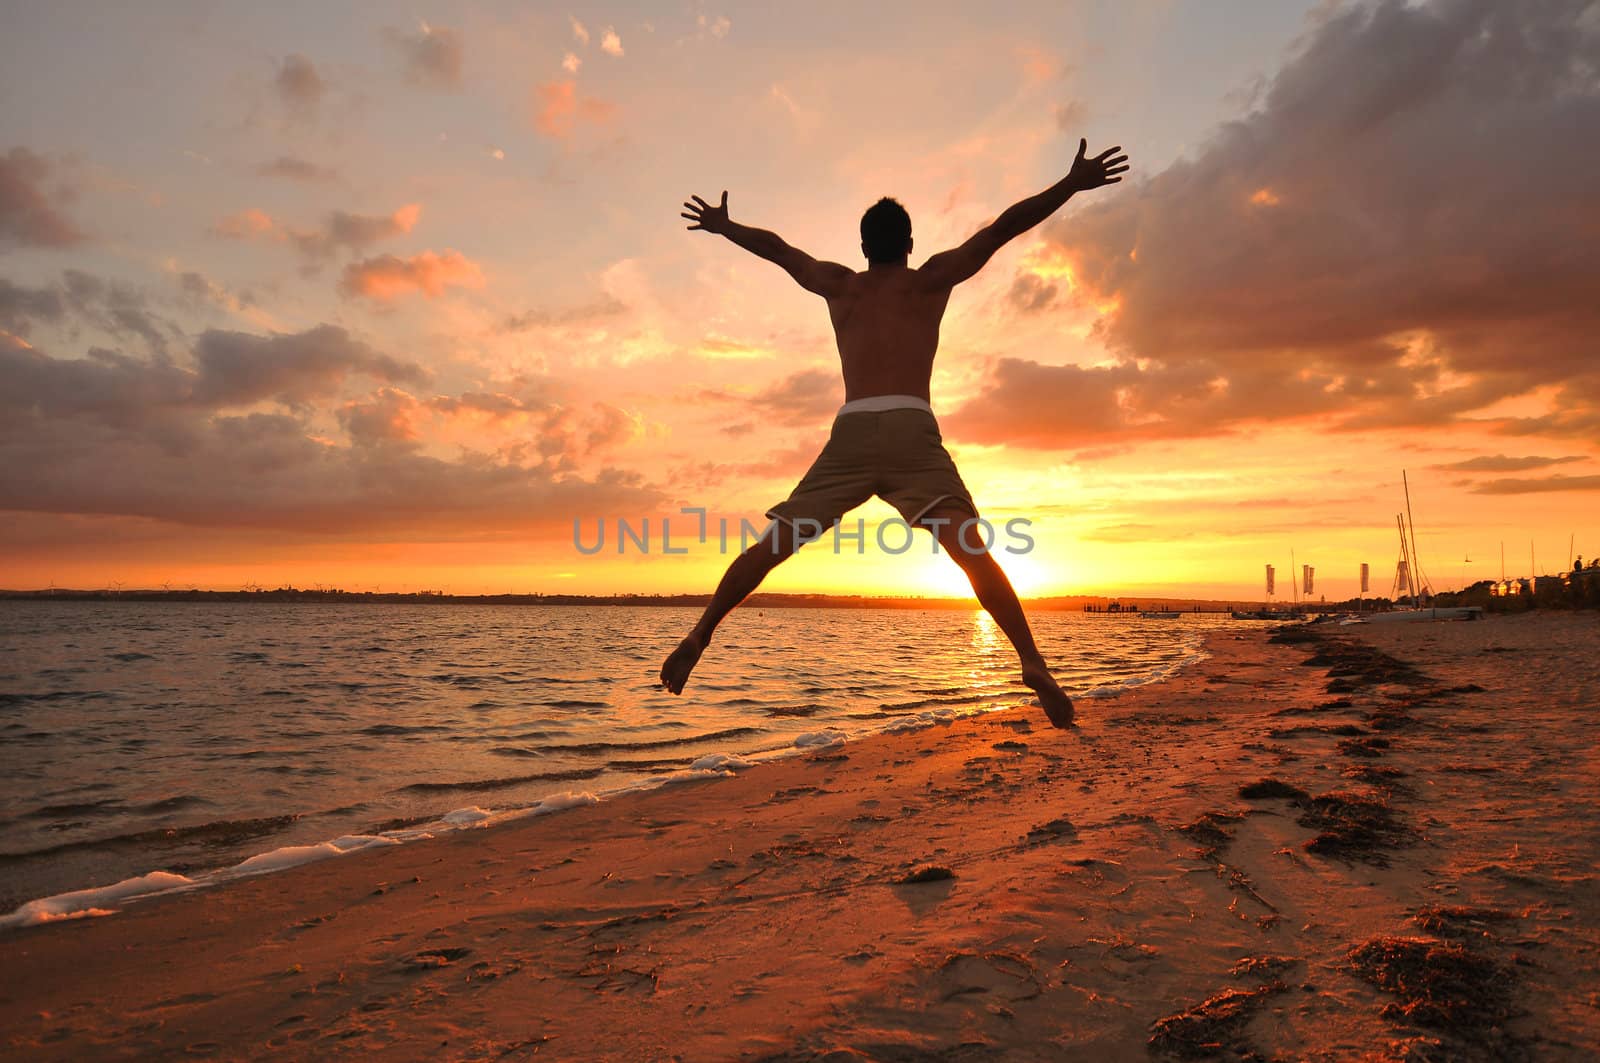 Young man with spread arms celebrating and enjoying the moment at the seaside at sunset by gravityimaging1